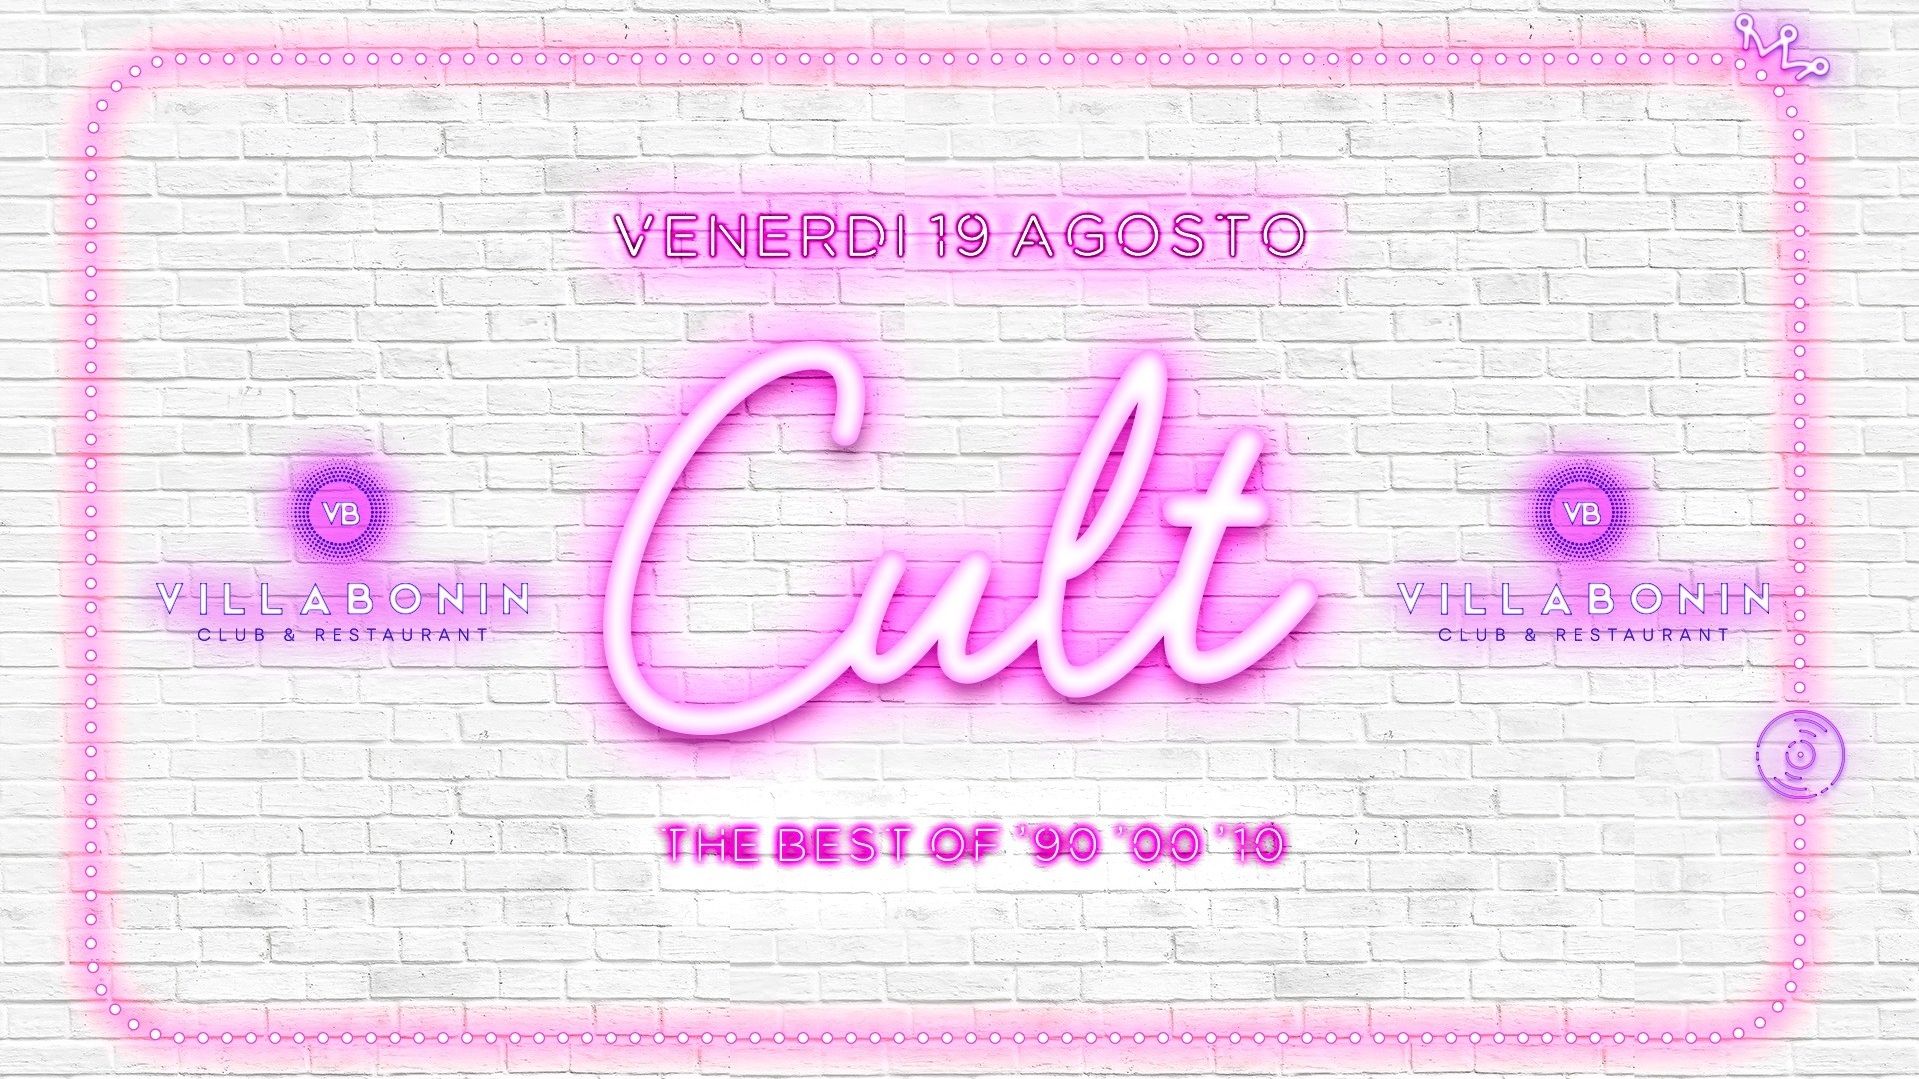 Cult - The Best of '90-'00-'10